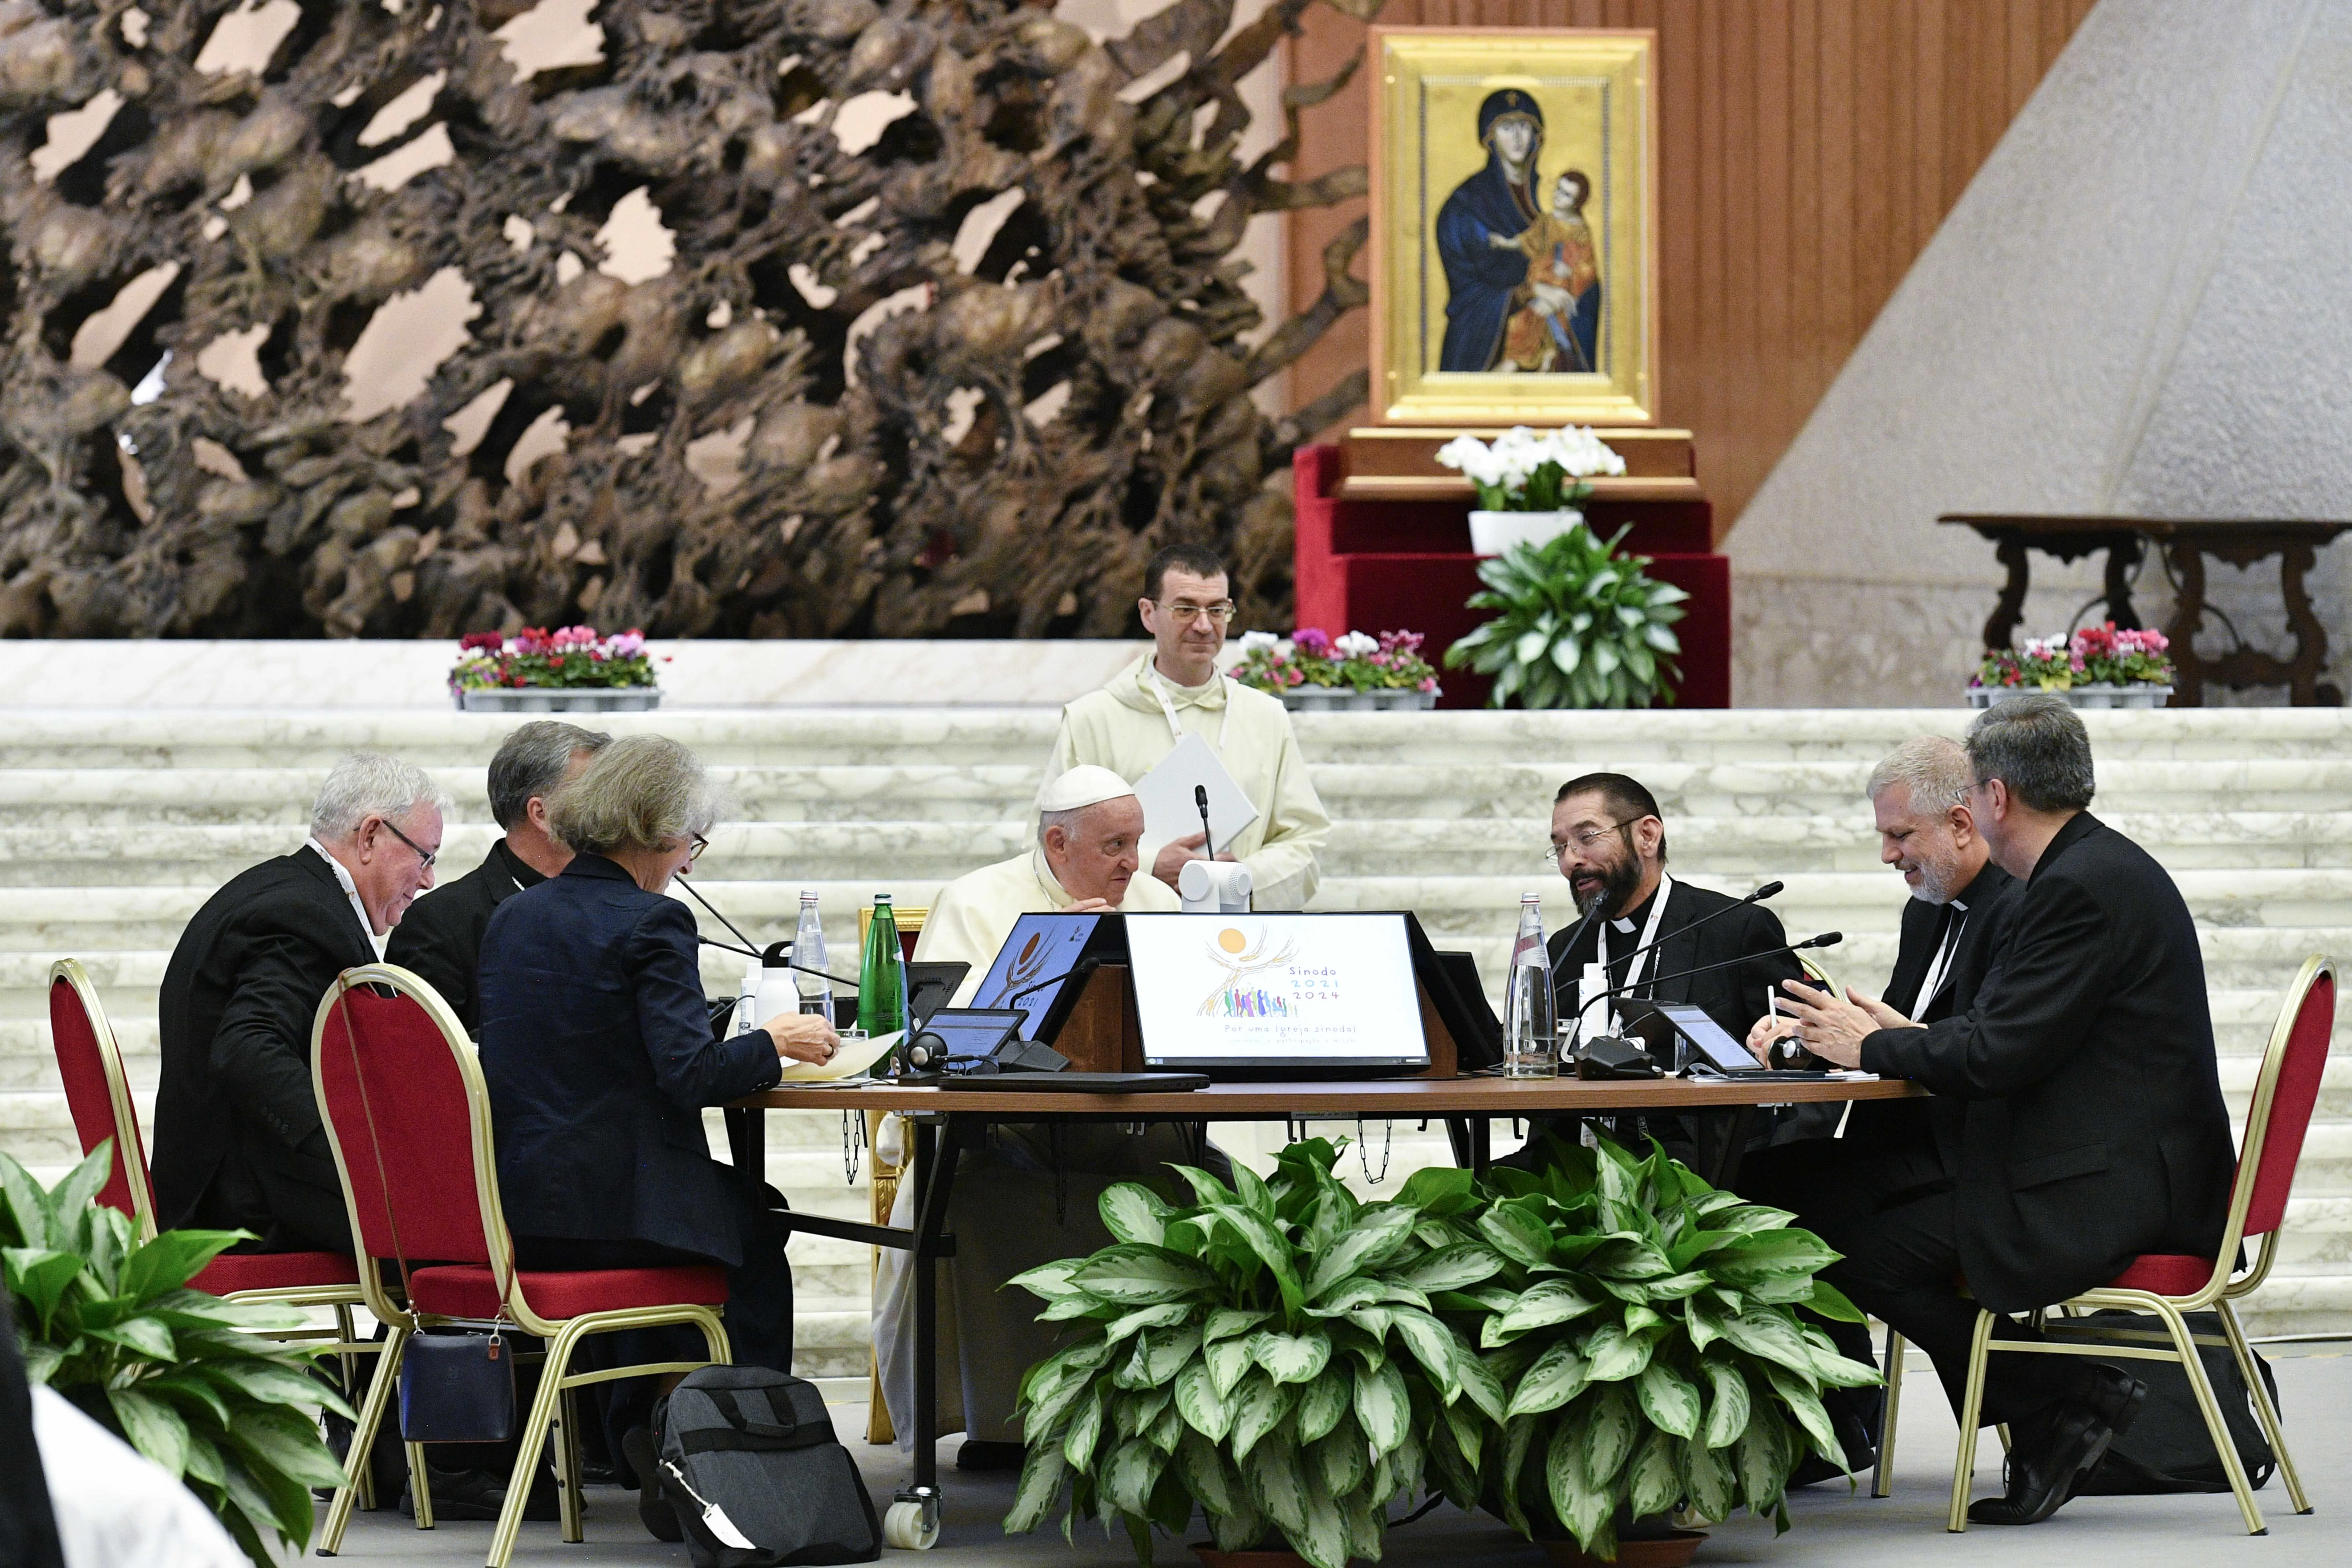 Pope Francis at the Synod on Synodality on Oct. 10, 2023. Credit: Vatican Media